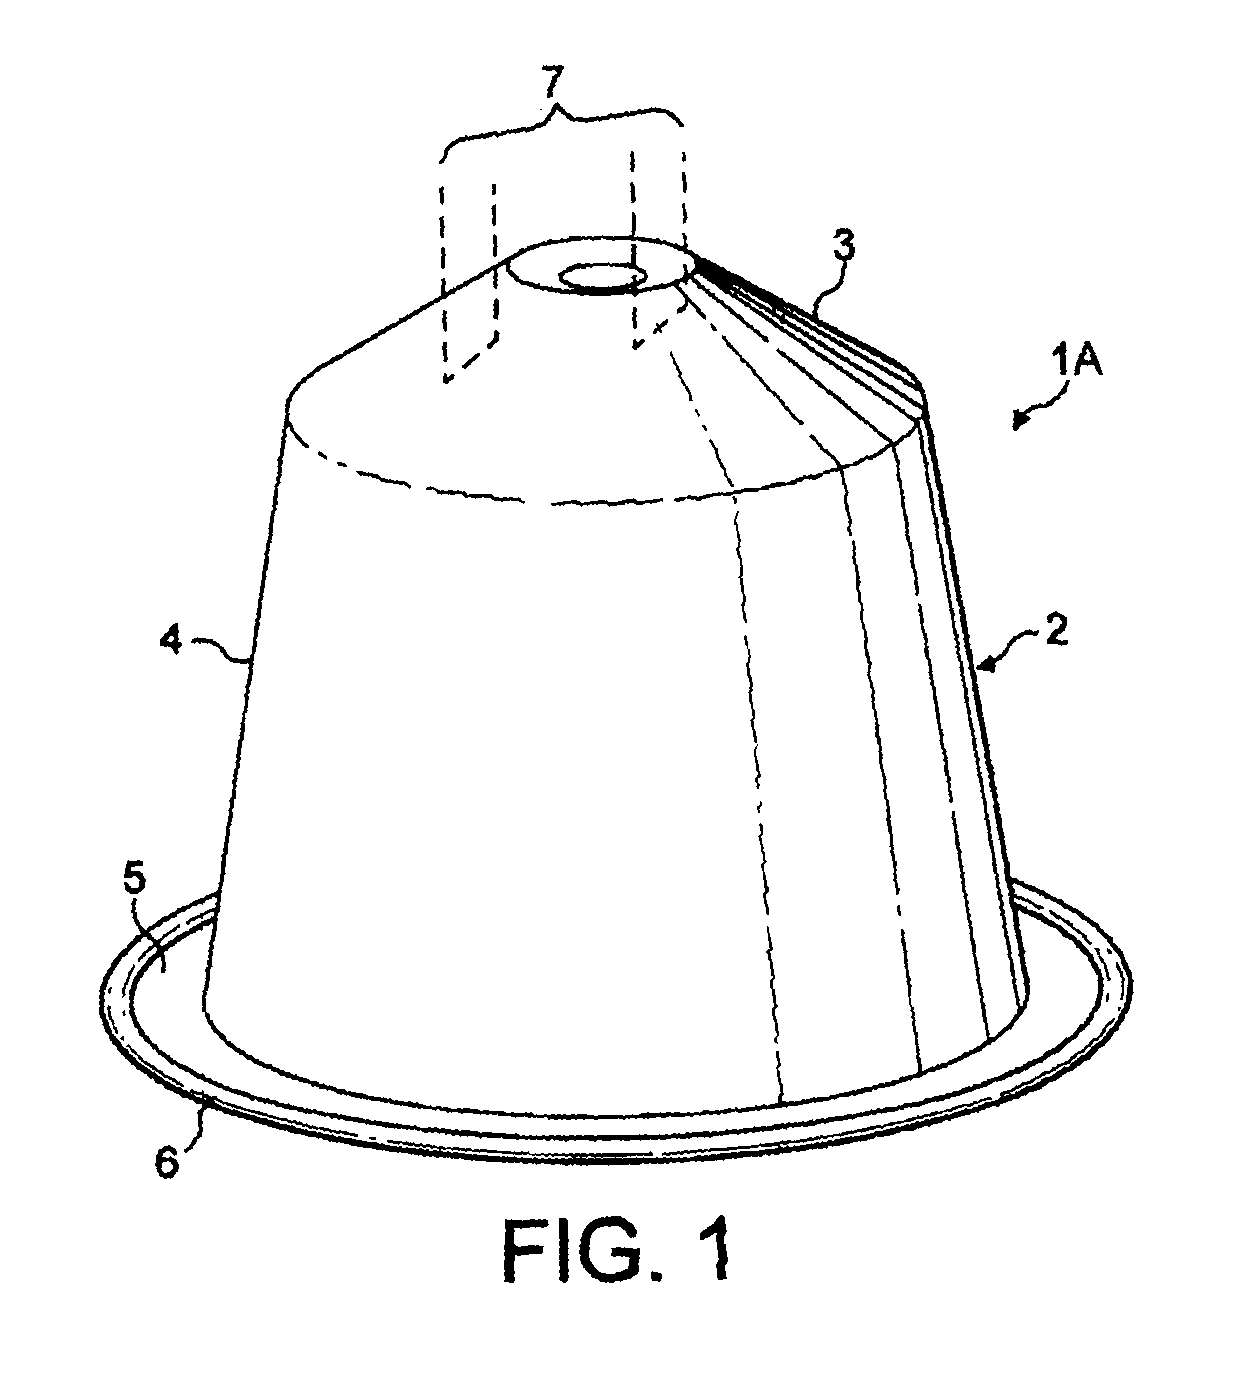 Capsule for preparing coffee in a device comprising a cartridge holder with relief and recessed elements